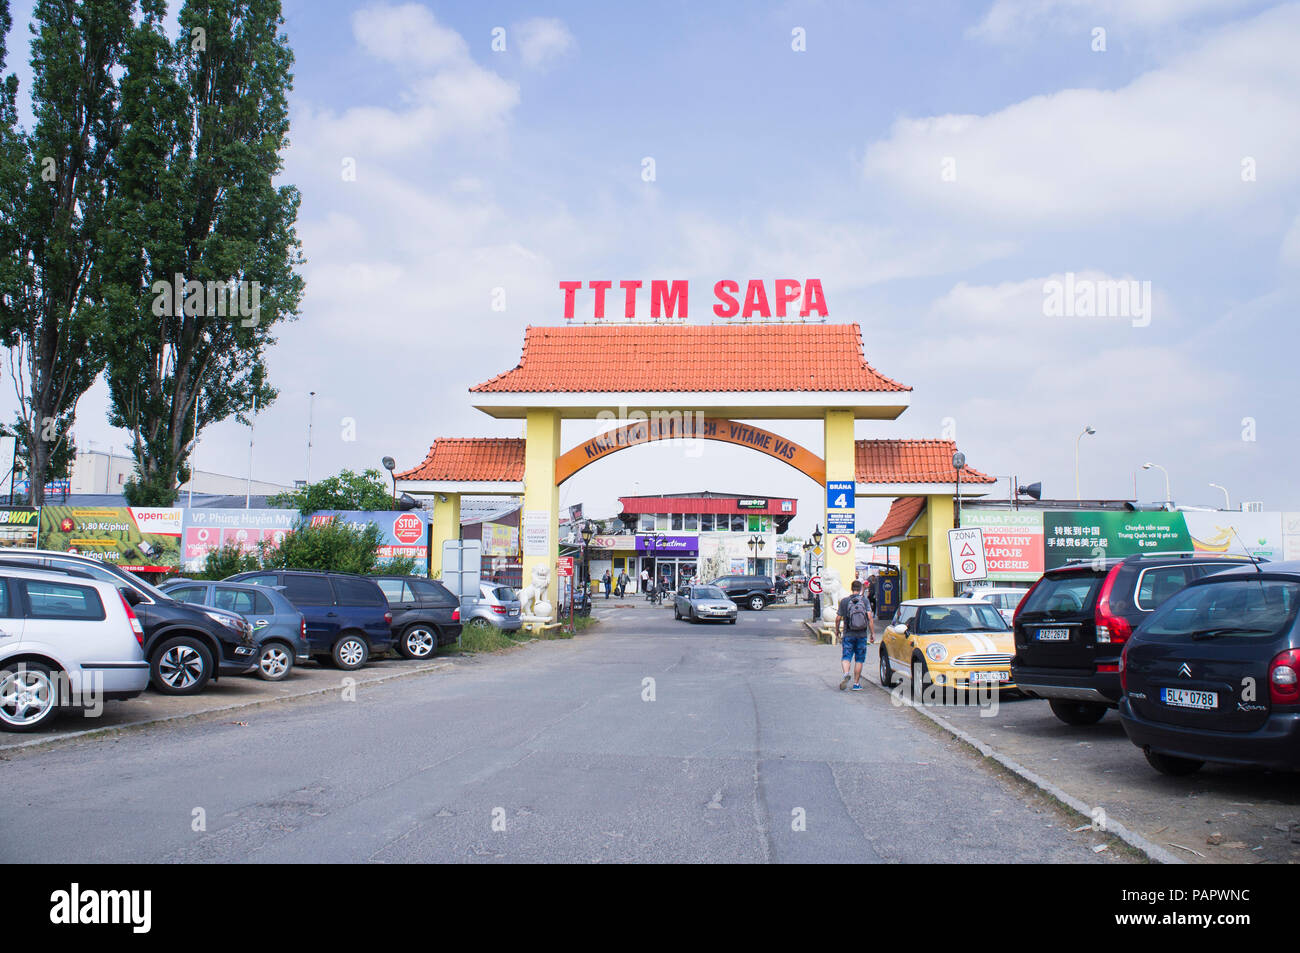 The large TTTM Sapa market place in Pisnice, the outskirts of Prague, Czech  Republic, May 19, 2018. Members of the Prague Vietnamese community operate  Stock Photo - Alamy